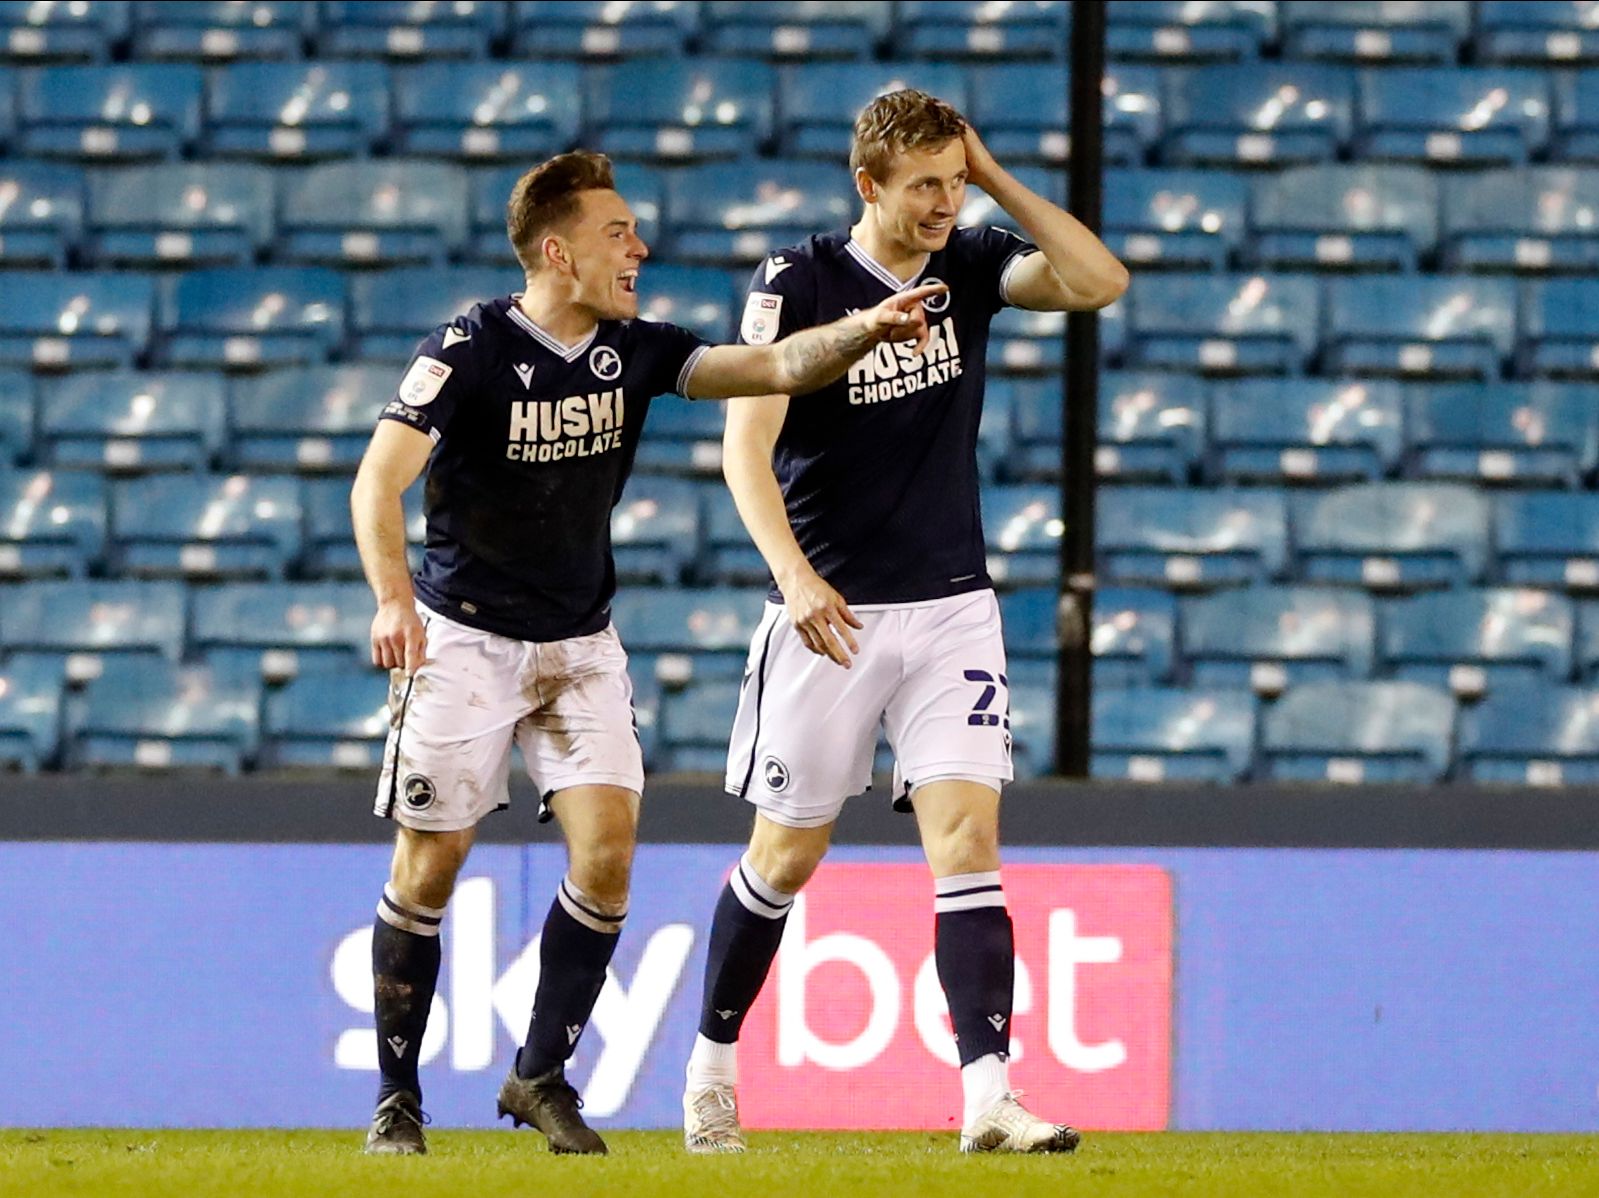 Soccer Football - Championship - Millwall v Birmingham City - The Den, London, Britain - February 17, 2021 Millwall's Ben Thompson celebrates scoring their second goal Action Images/Paul Childs EDITORIAL USE ONLY. No use with unauthorized audio, video, data, fixture lists, club/league logos or 'live' services. Online in-match use limited to 75 images, no video emulation. No use in betting, games or single club /league/player publications.  Please contact your account representative for further d